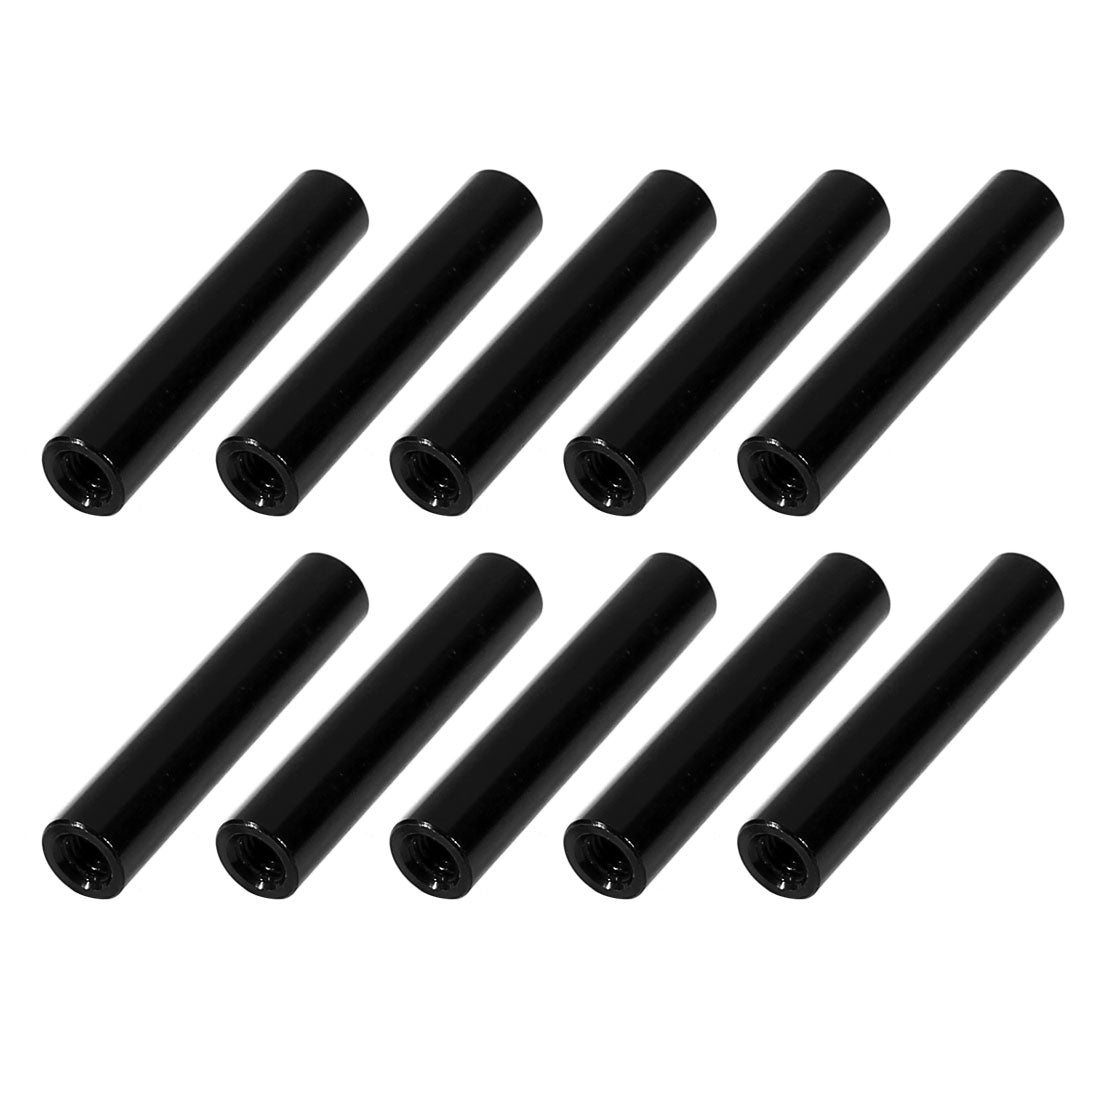 uxcell Uxcell 10Pcs M3 x 25mm Round Aluminum Column Alloy Standoff Spacer Stud Fastener for Quadcopter Black